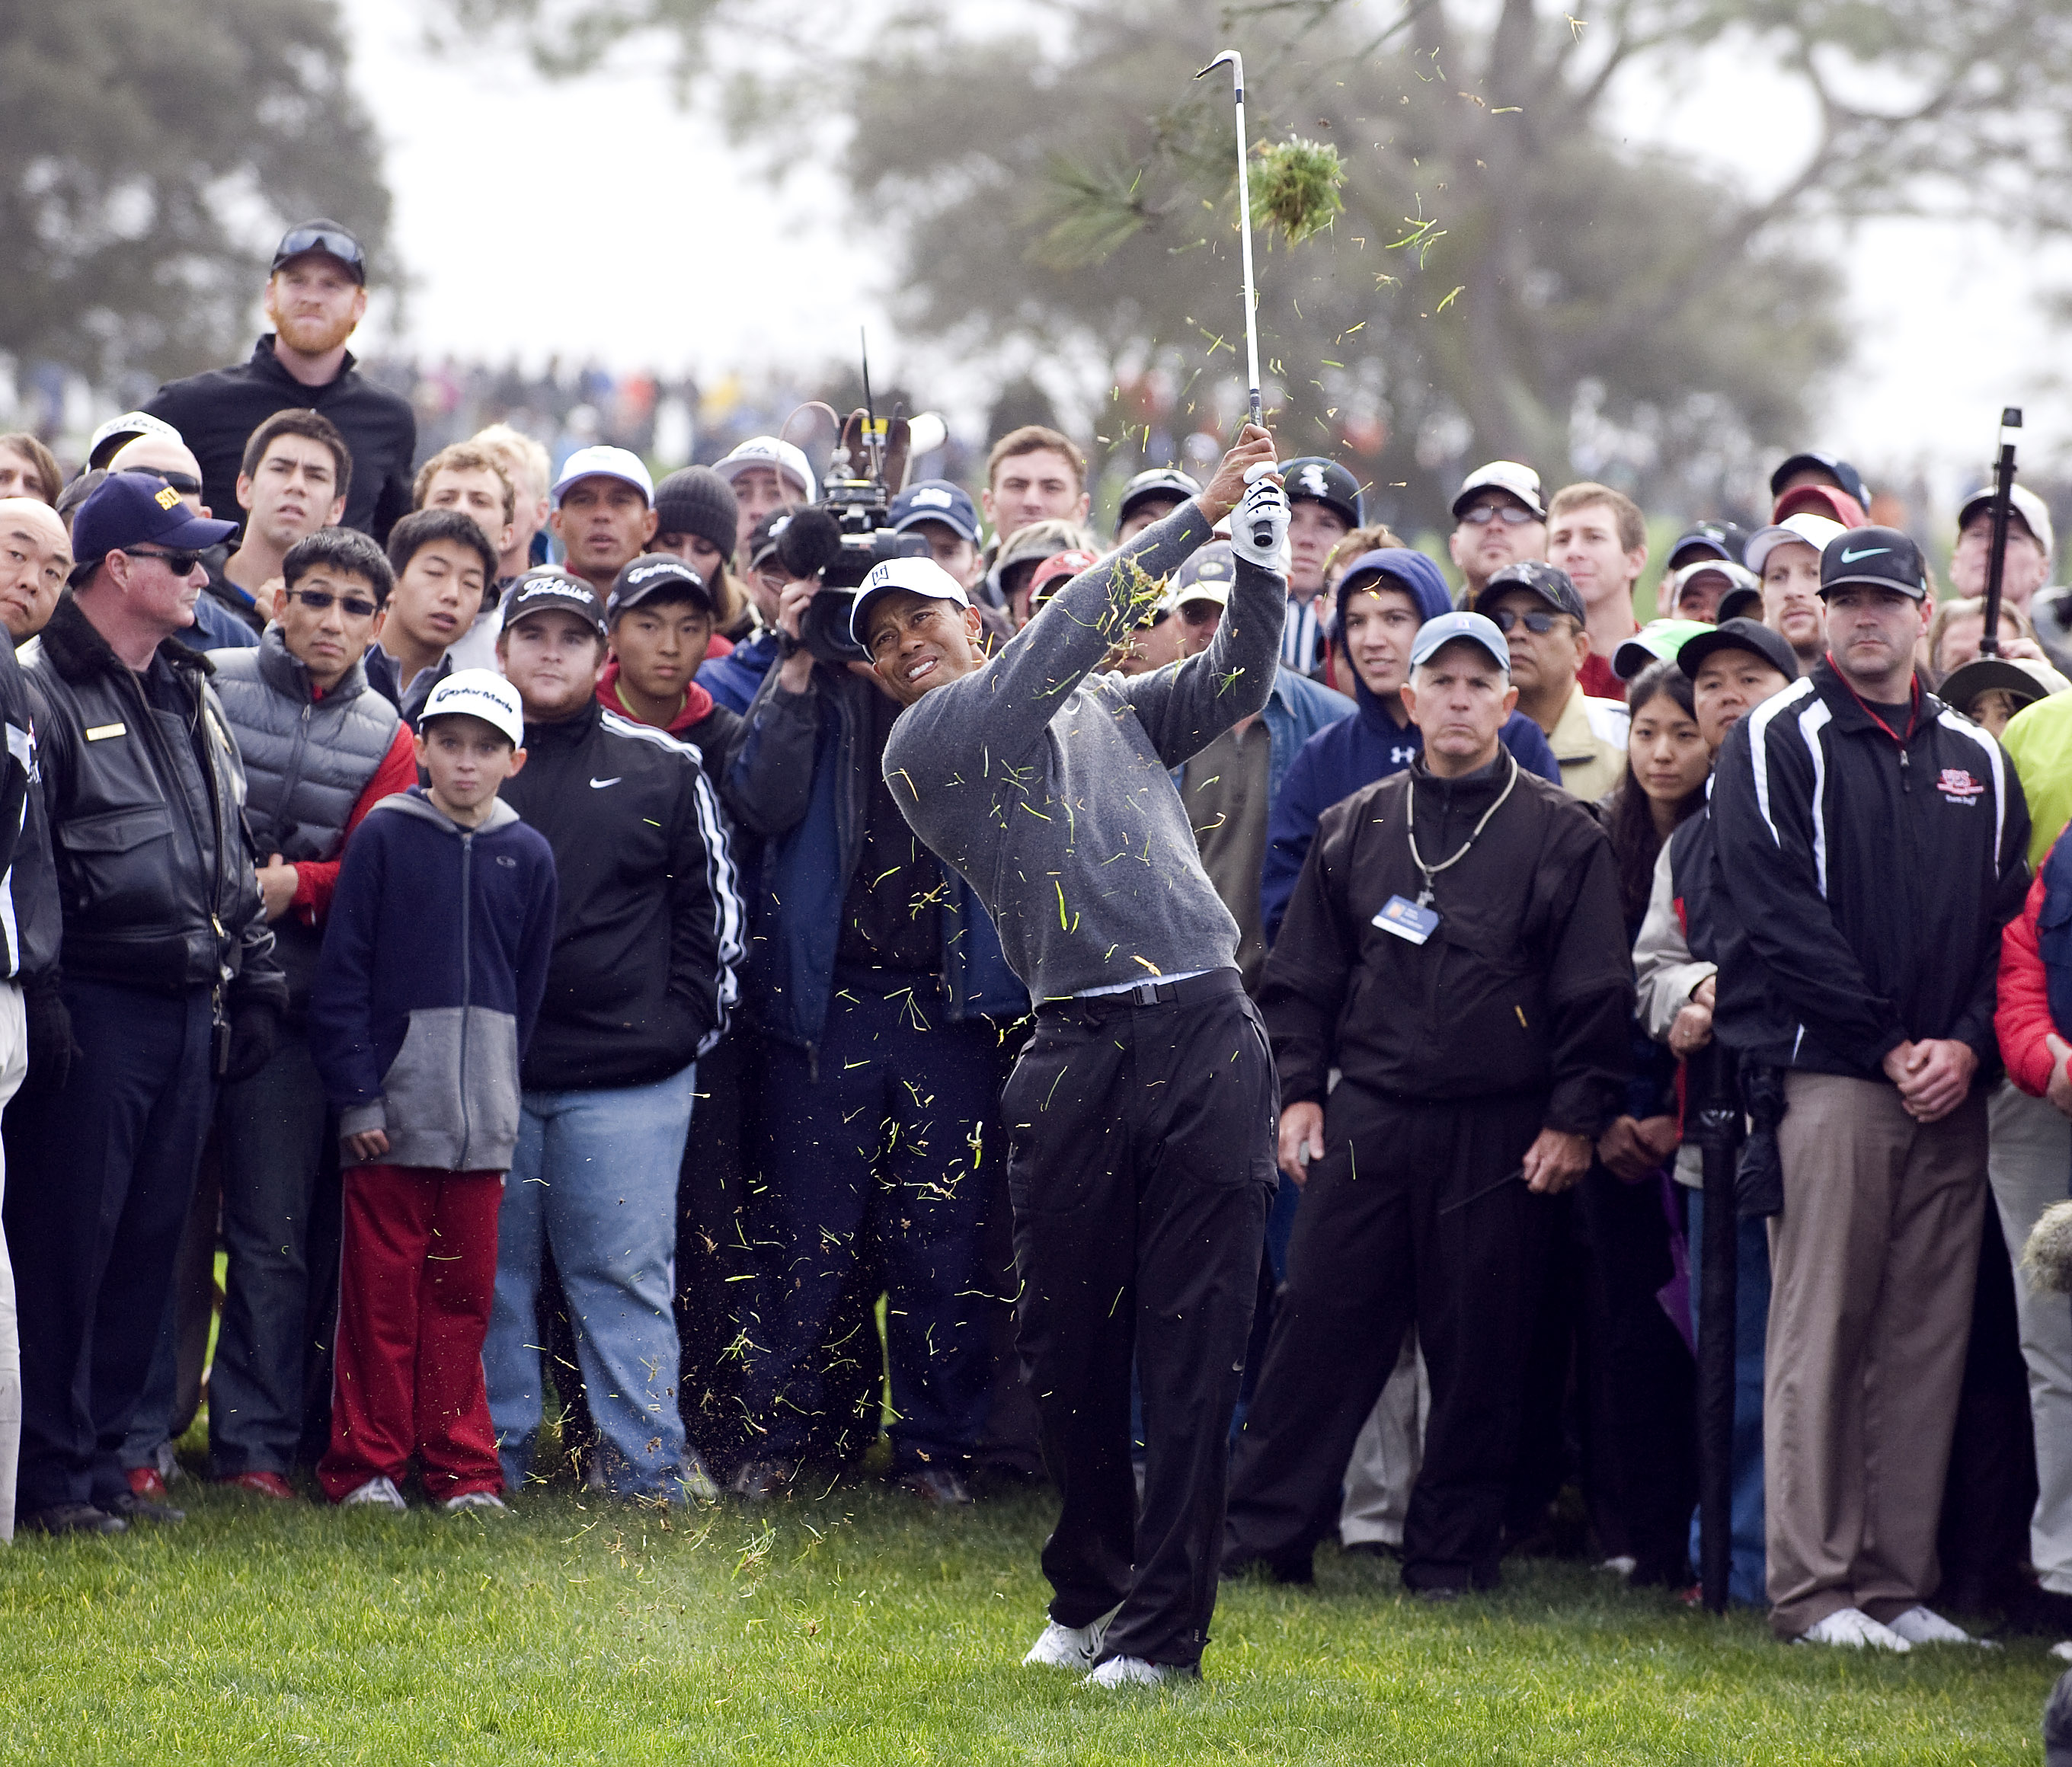 Tiger Woods Photo Shows People Are Obsessed With Capturing Moments